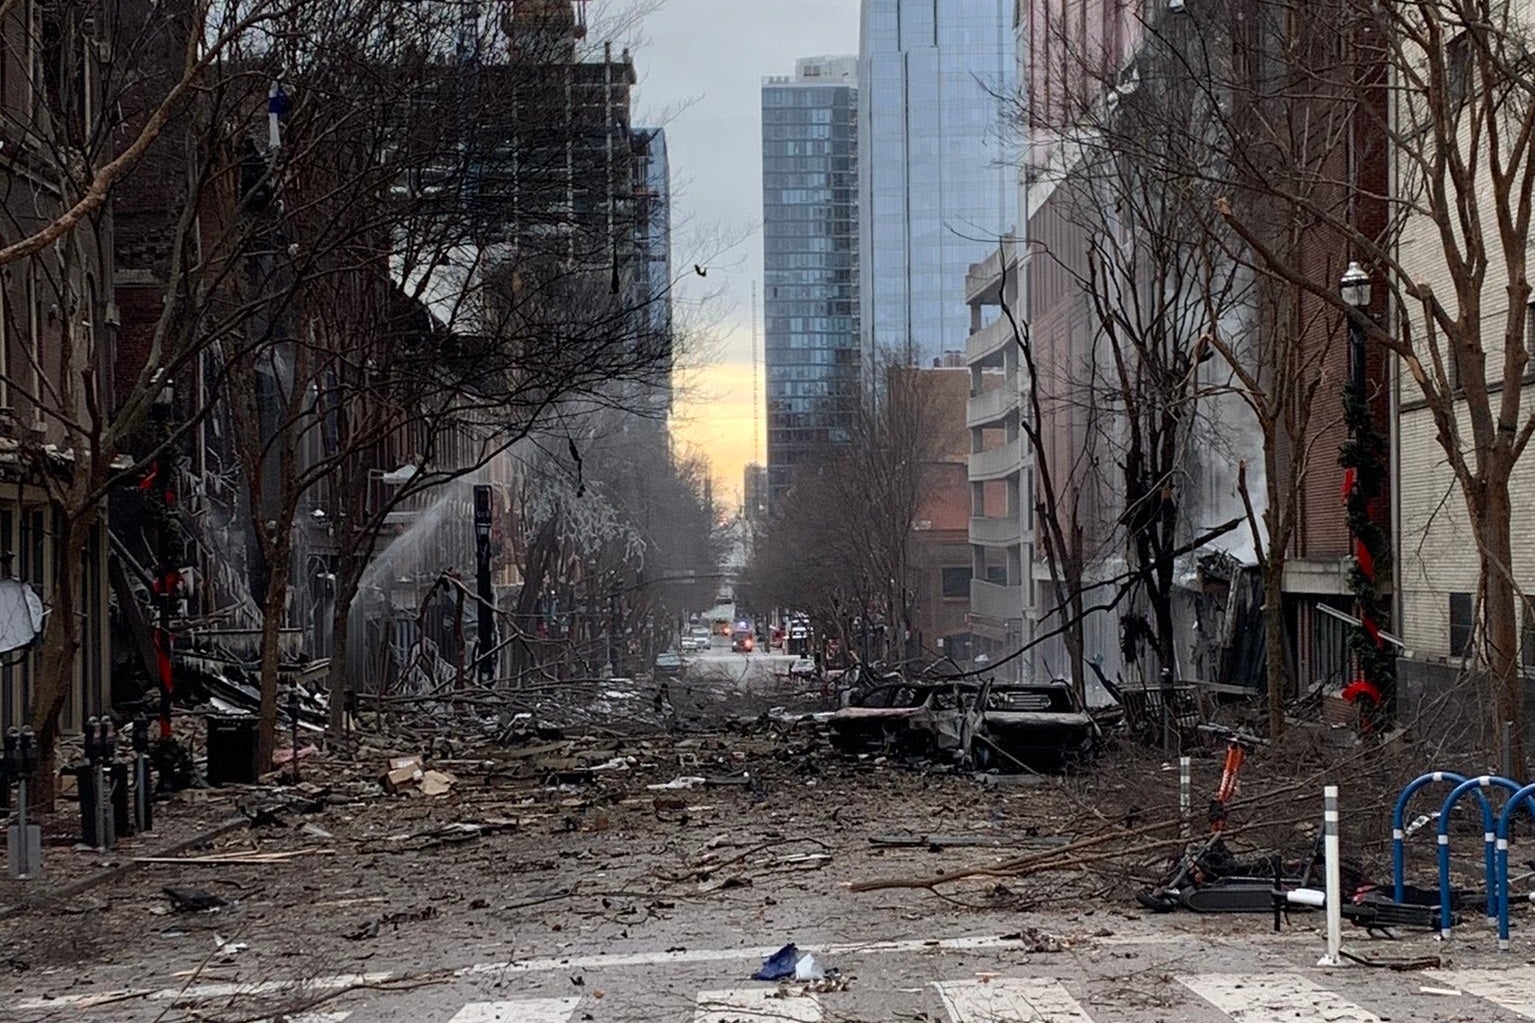 Branches and rubble strewn across a city street